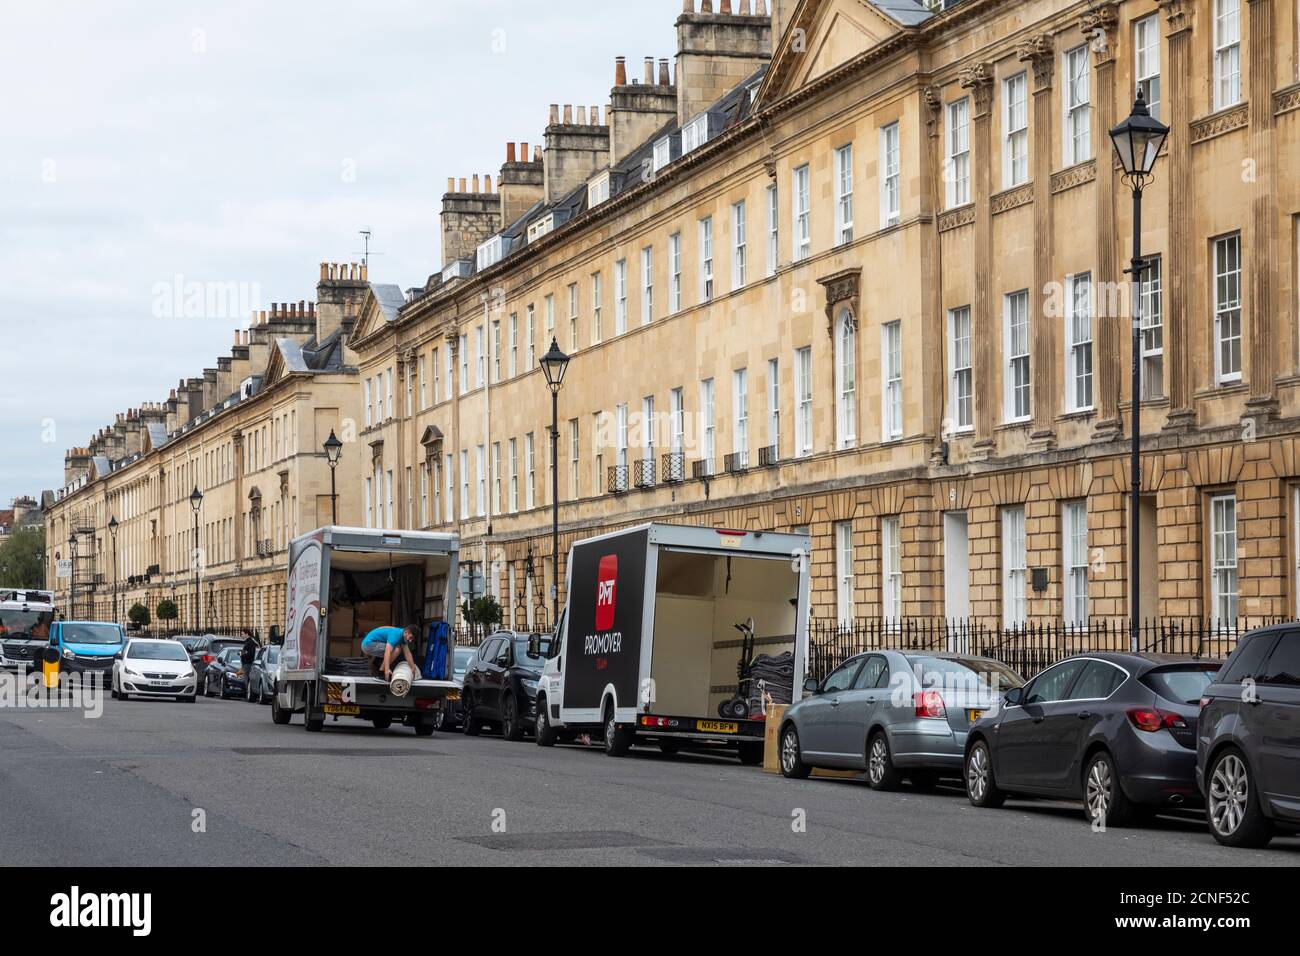 Removal vans in Great Pulteney Street, City of Bath, Somerset, England, UK Stock Photo